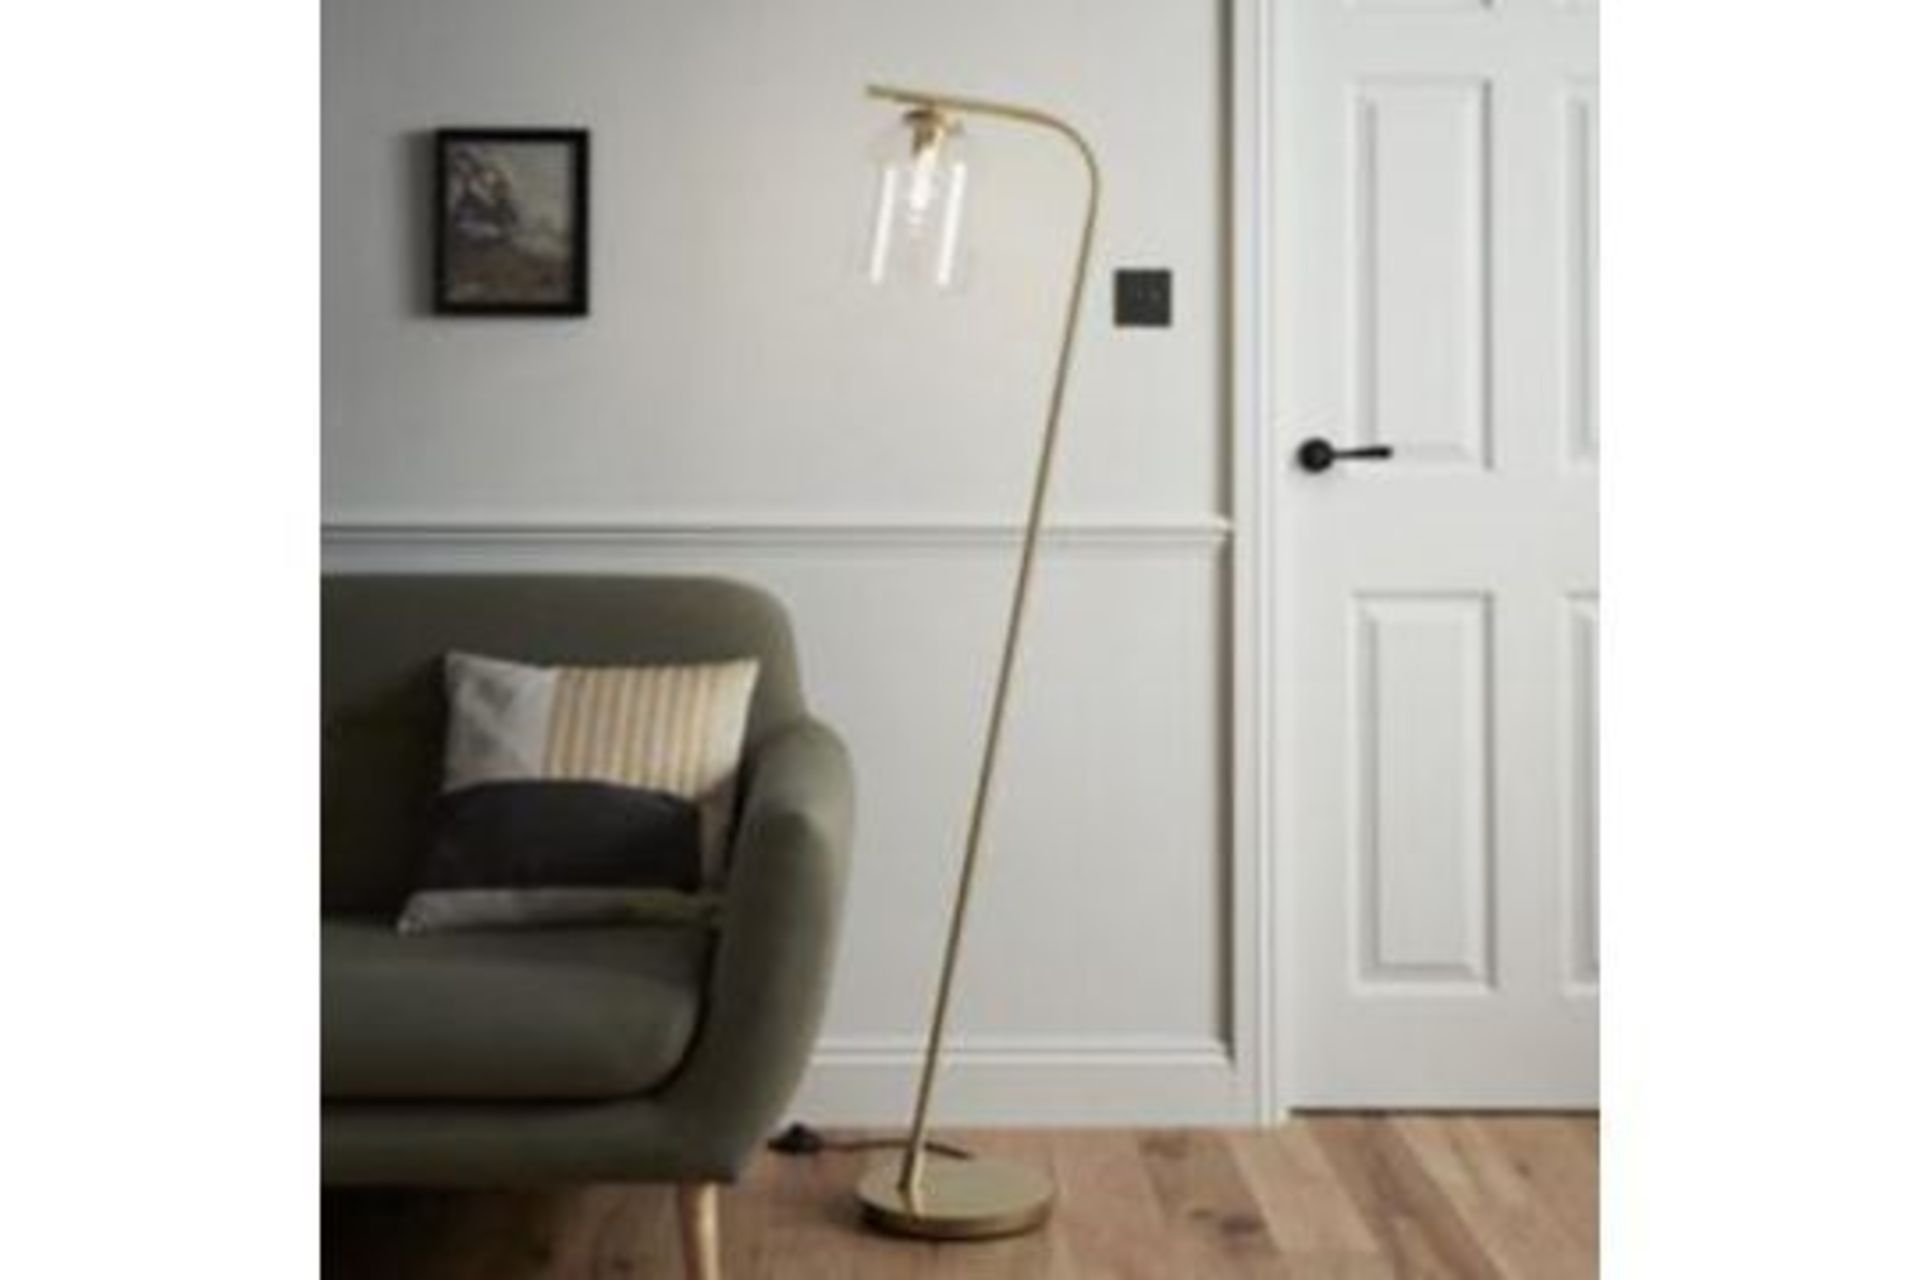 goodHome Thestias Brass Effect Floor Light - (R50) This brushed brass effect floor lamp has a